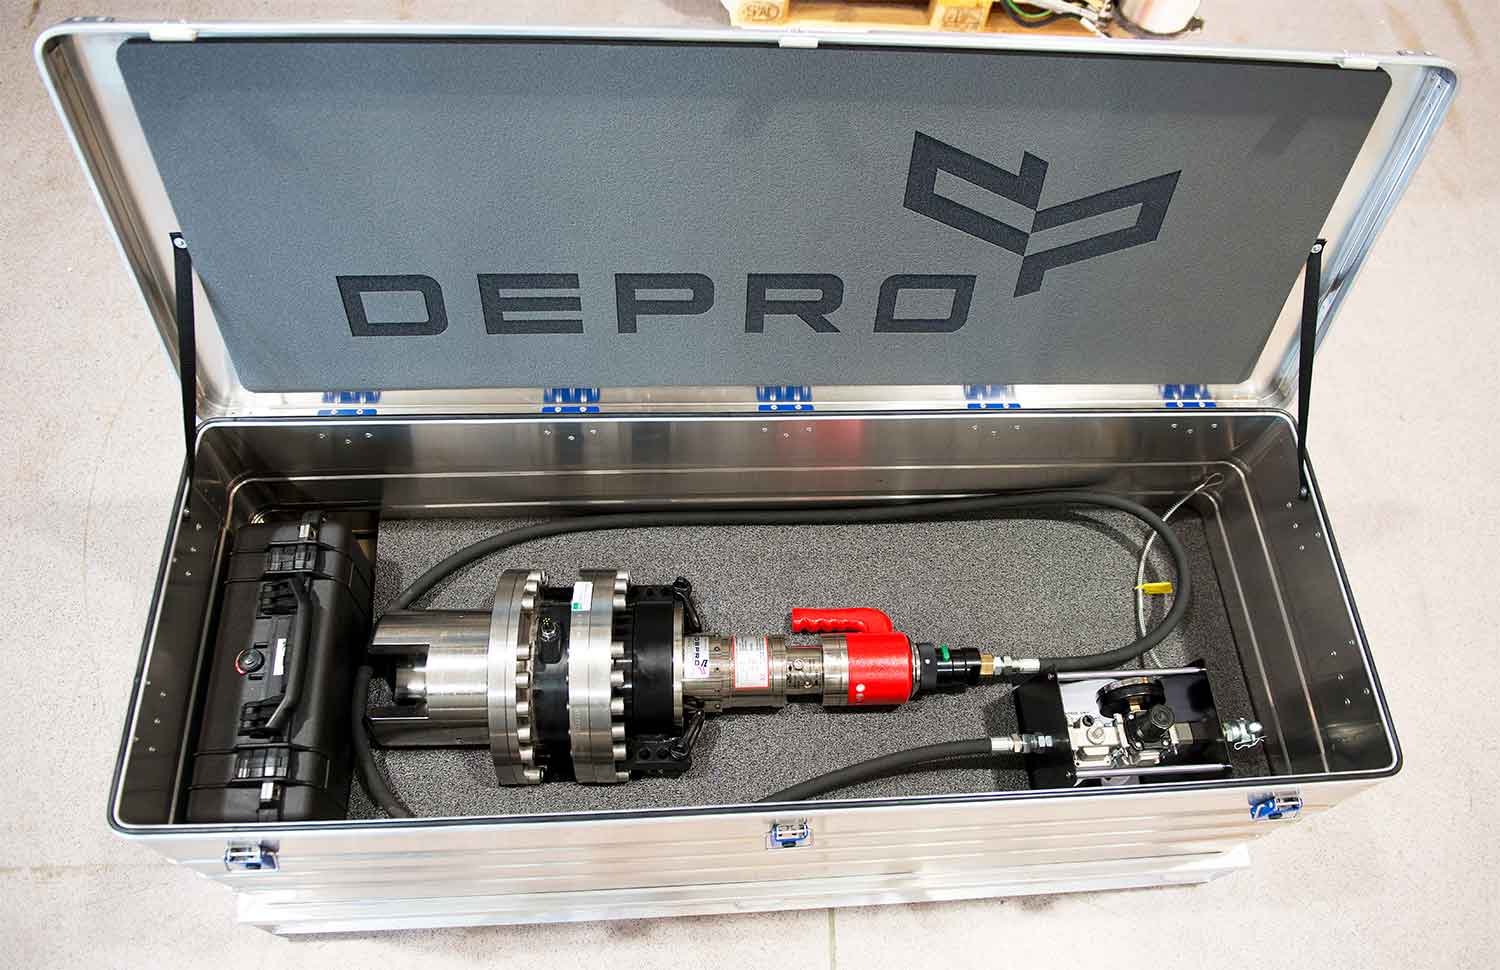 Subsea pneumatic Torque Tool in a transport box